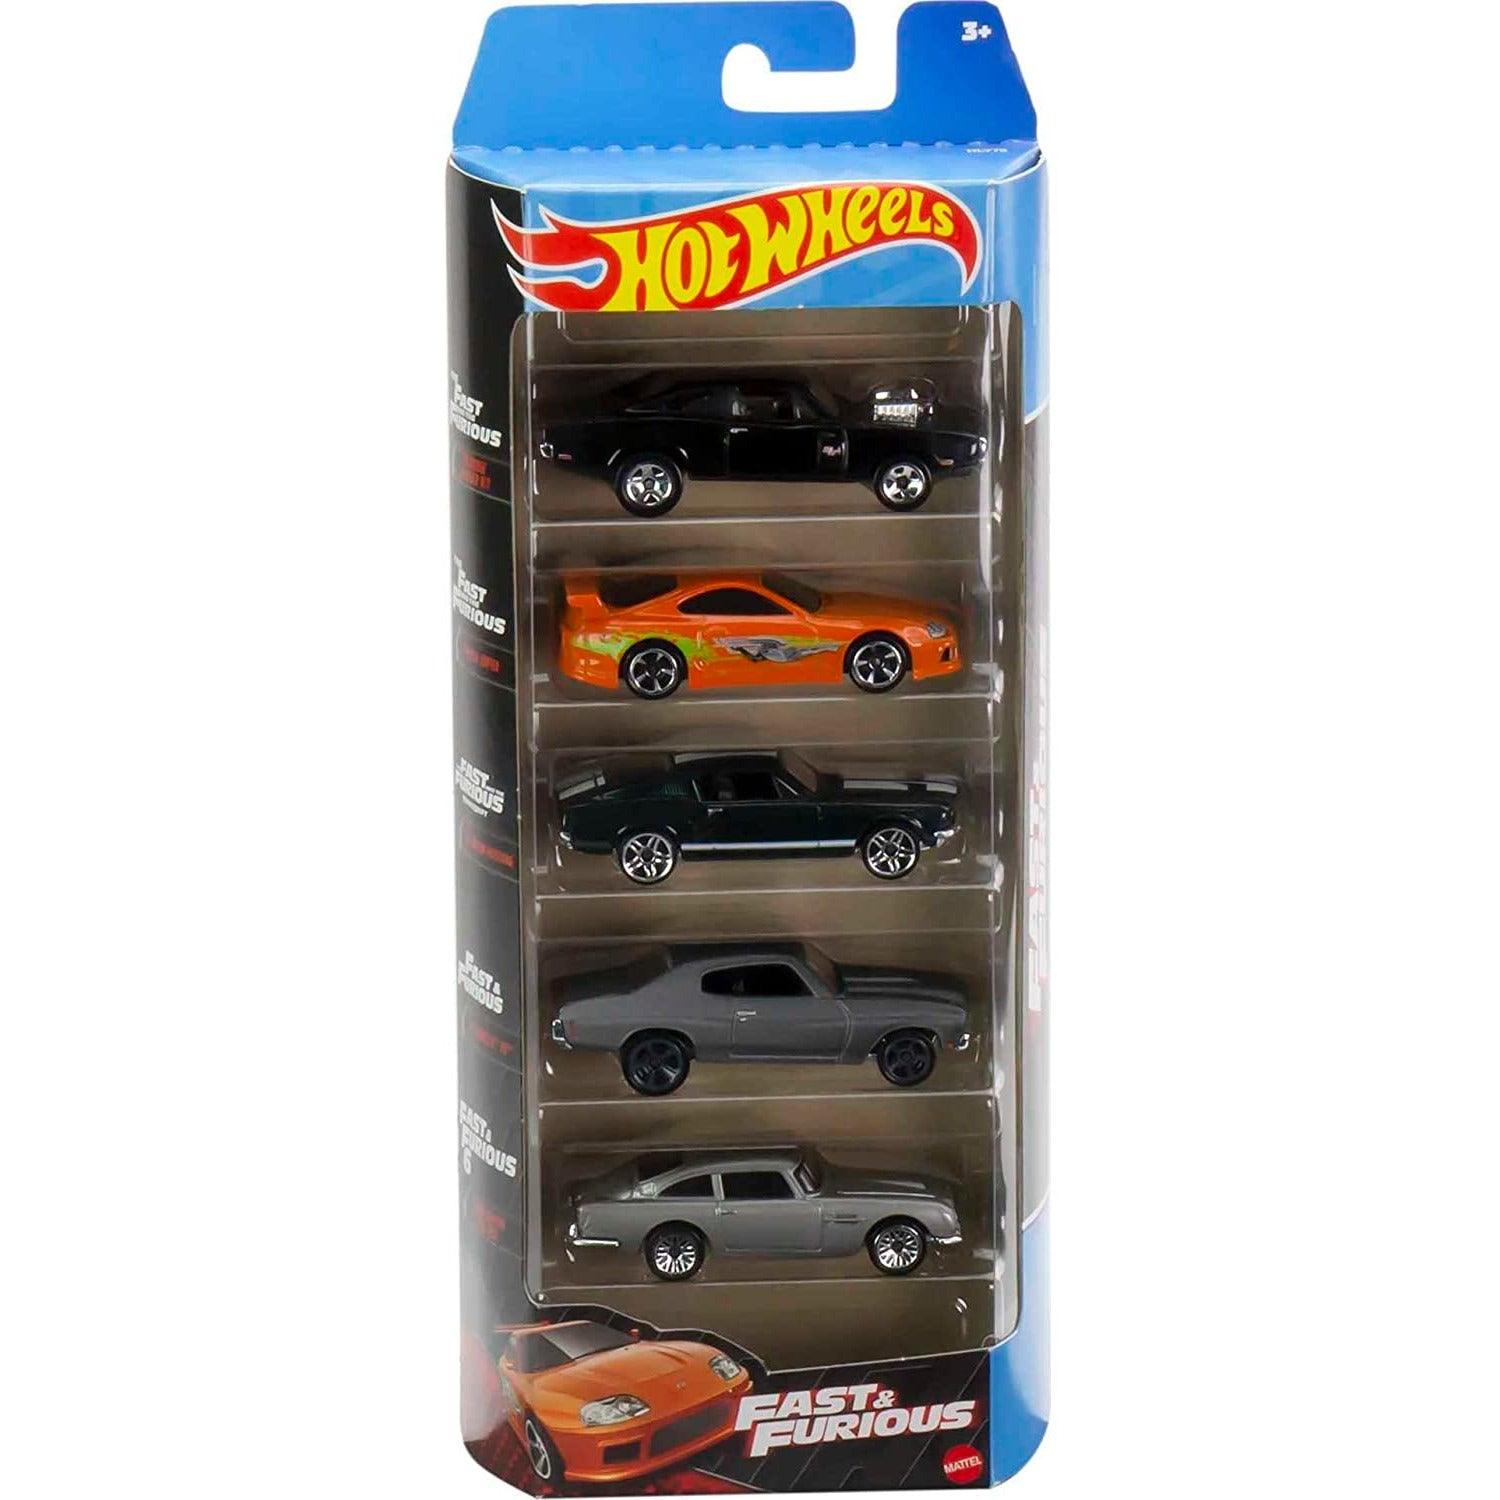 Hot Wheels Fast and Furious 5-Pack of Toy Race and Drift Cars in 1:64 Scale with Exclusive Decos (Styles May Vary)